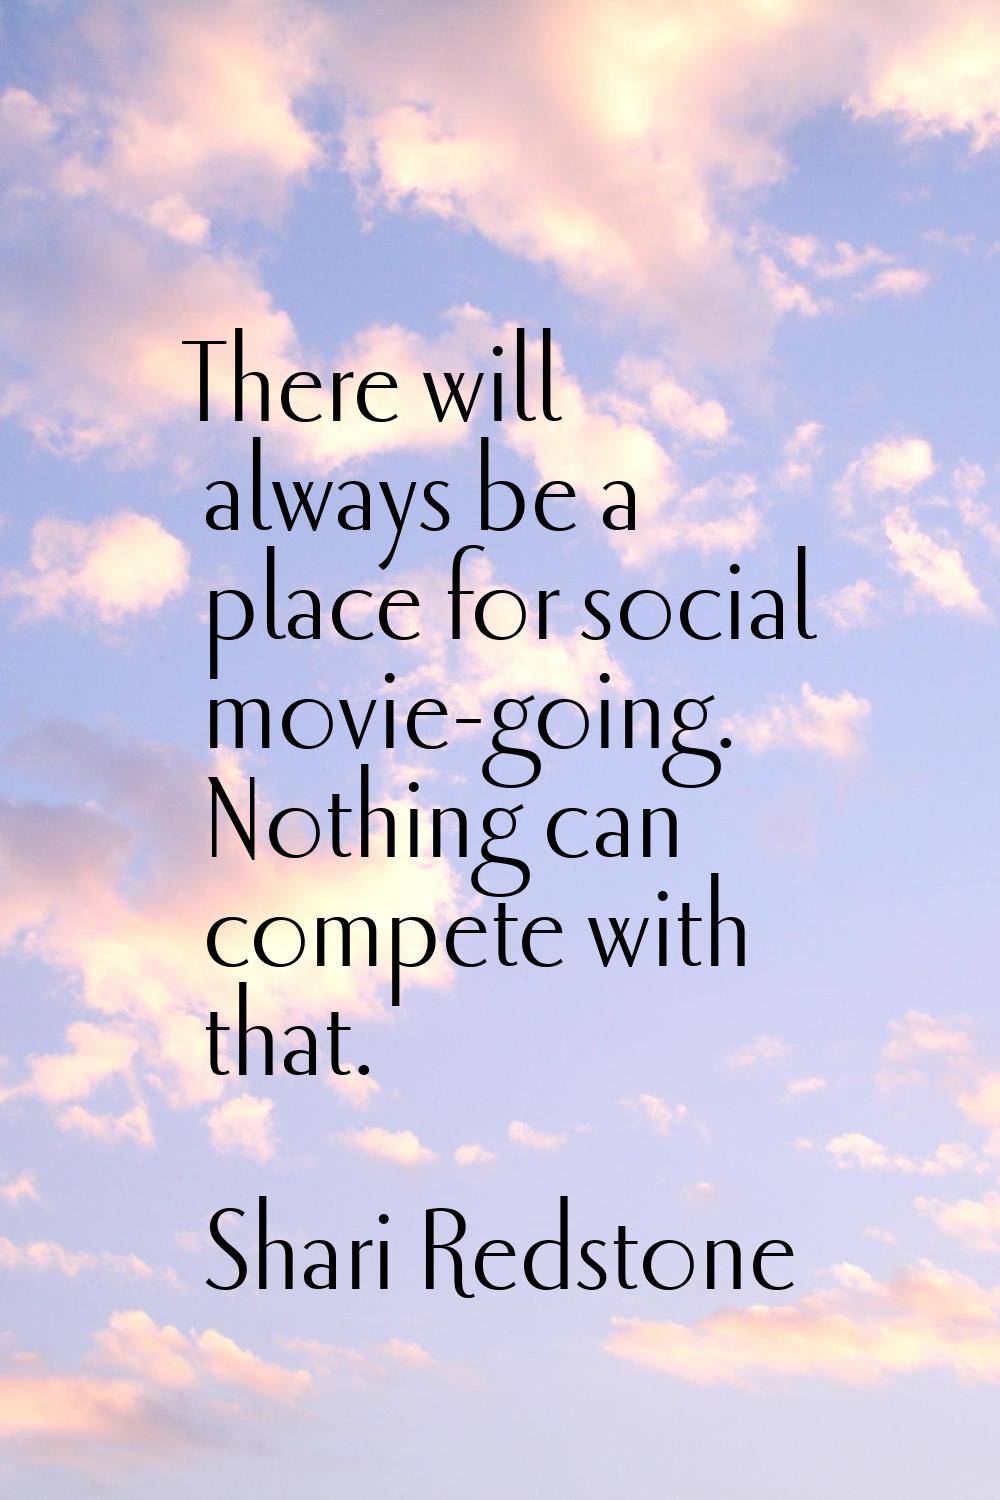 There will always be a place for social movie-going. Nothing can compete with that.